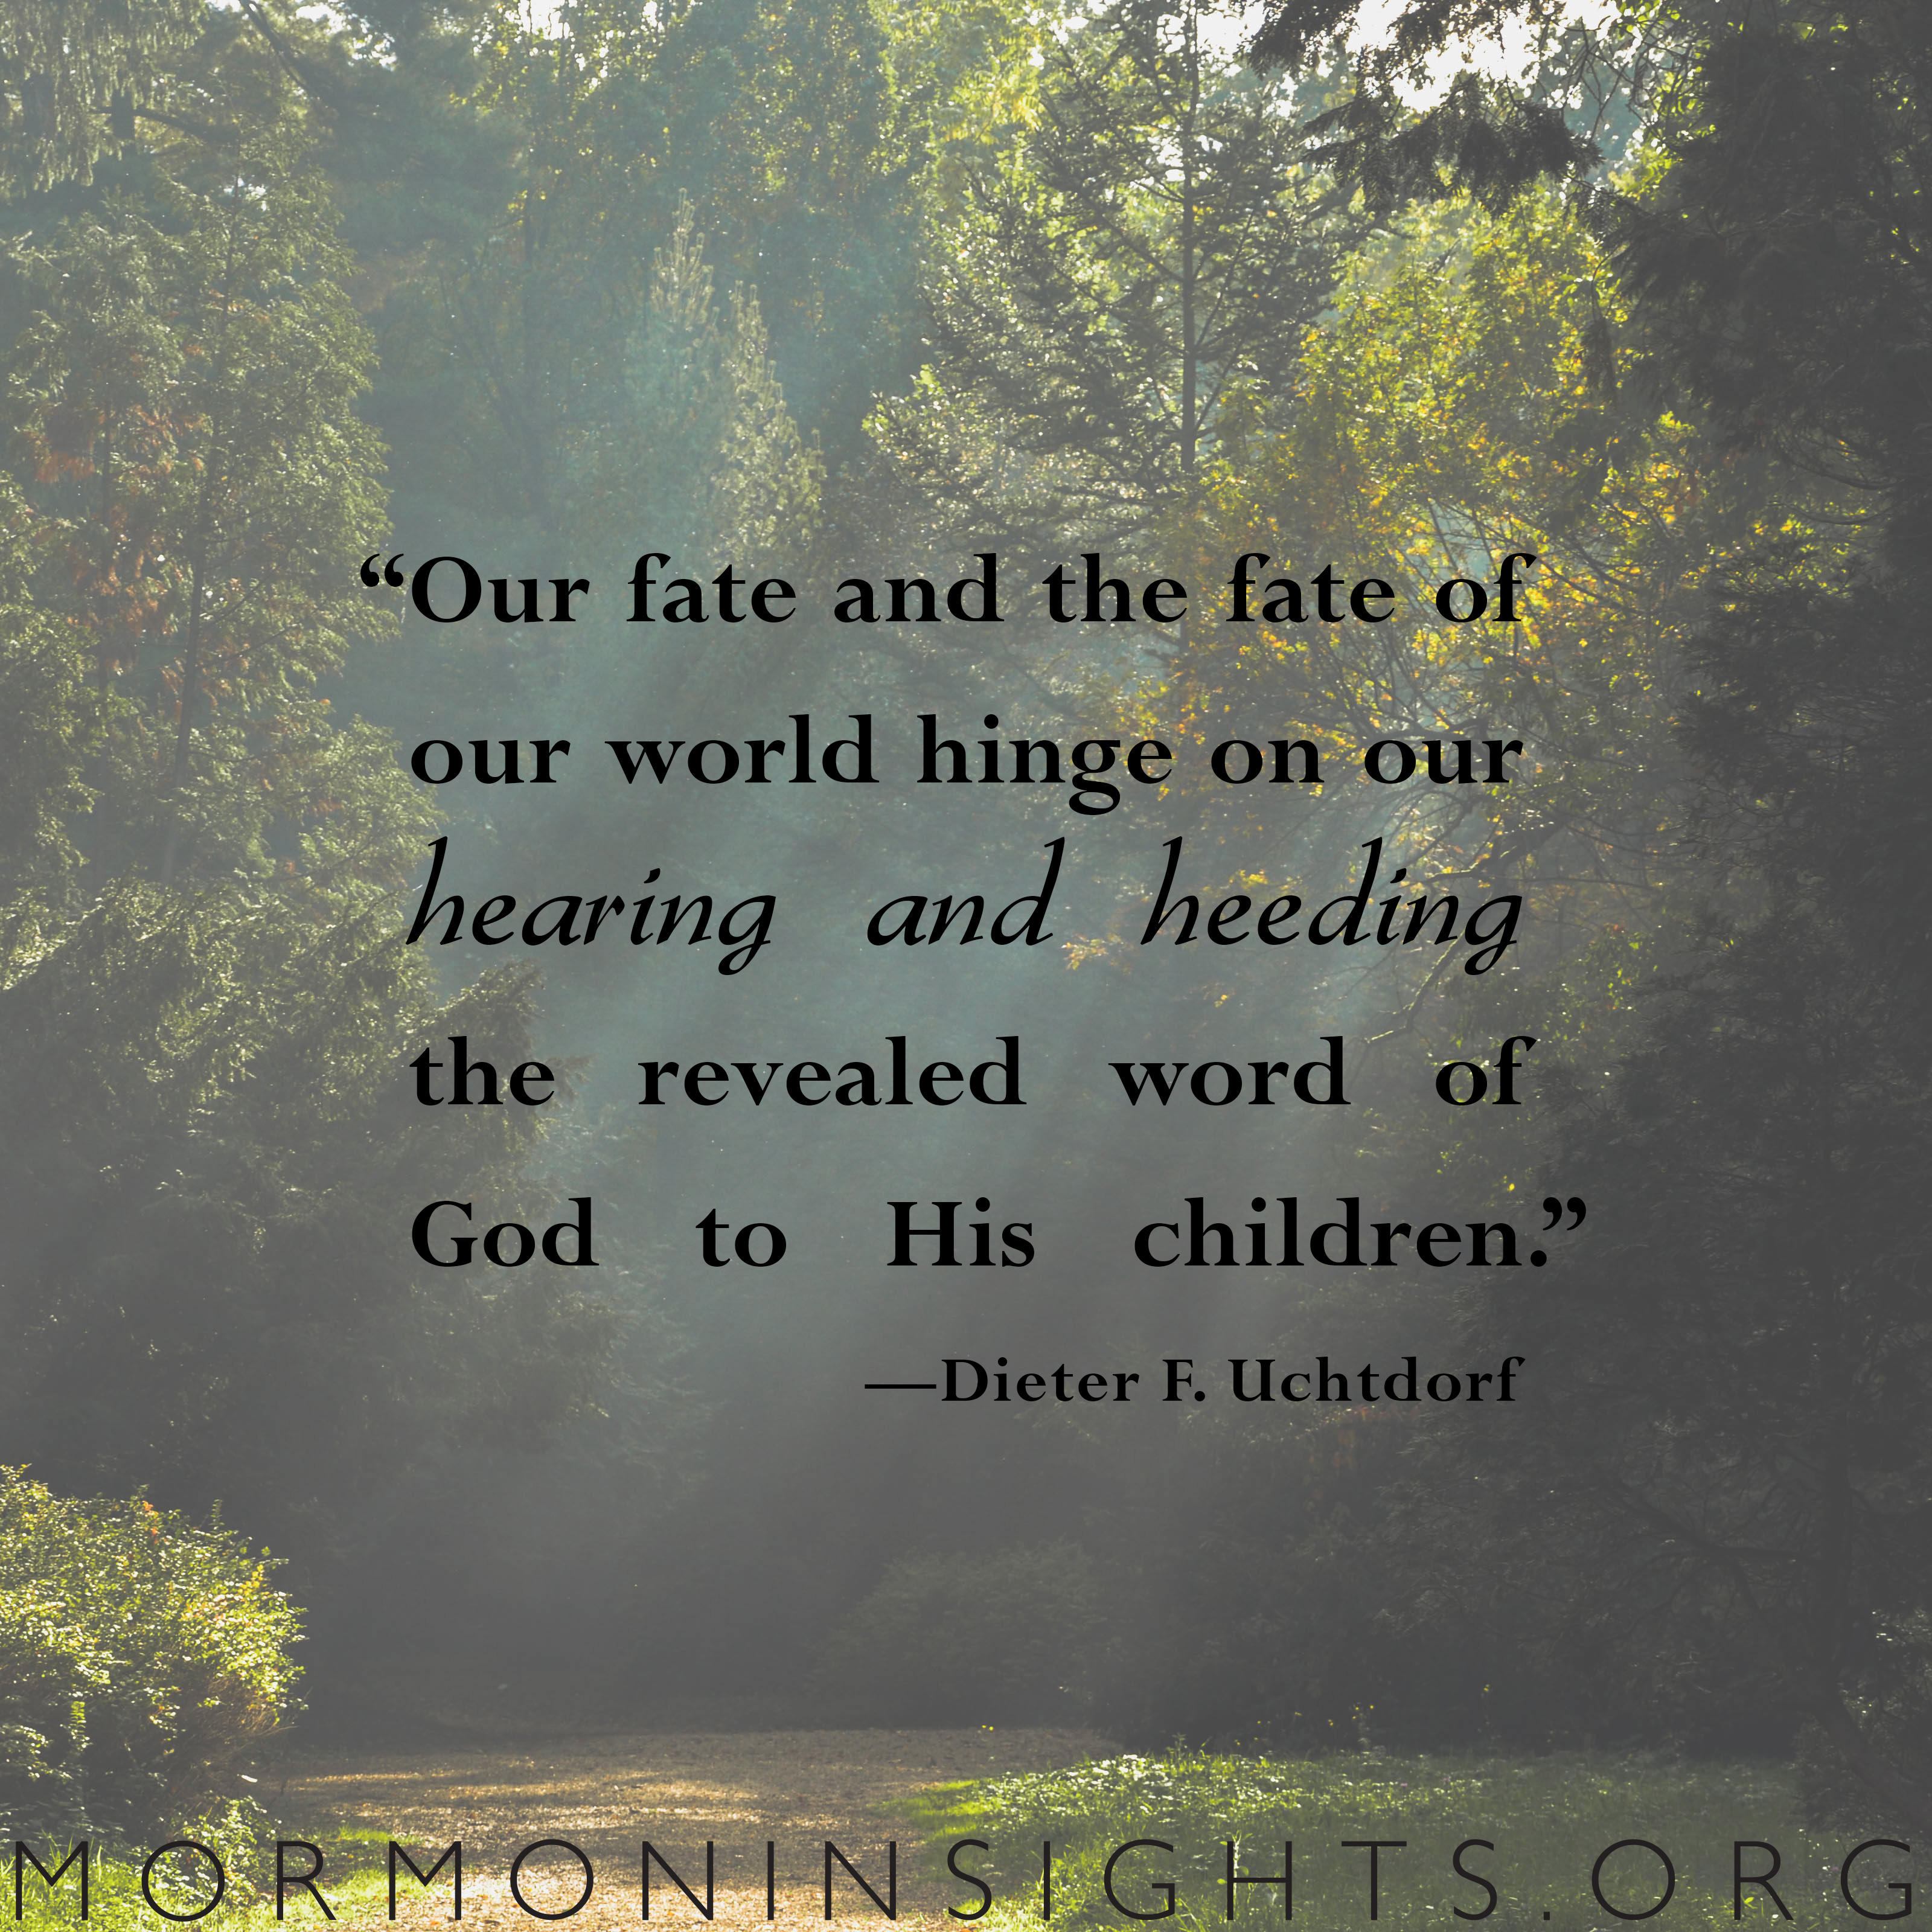 "Our fate and the fate of our world hinge on our hearing and heading the revealed word of God to His children." Dieter F. Uchtdorf